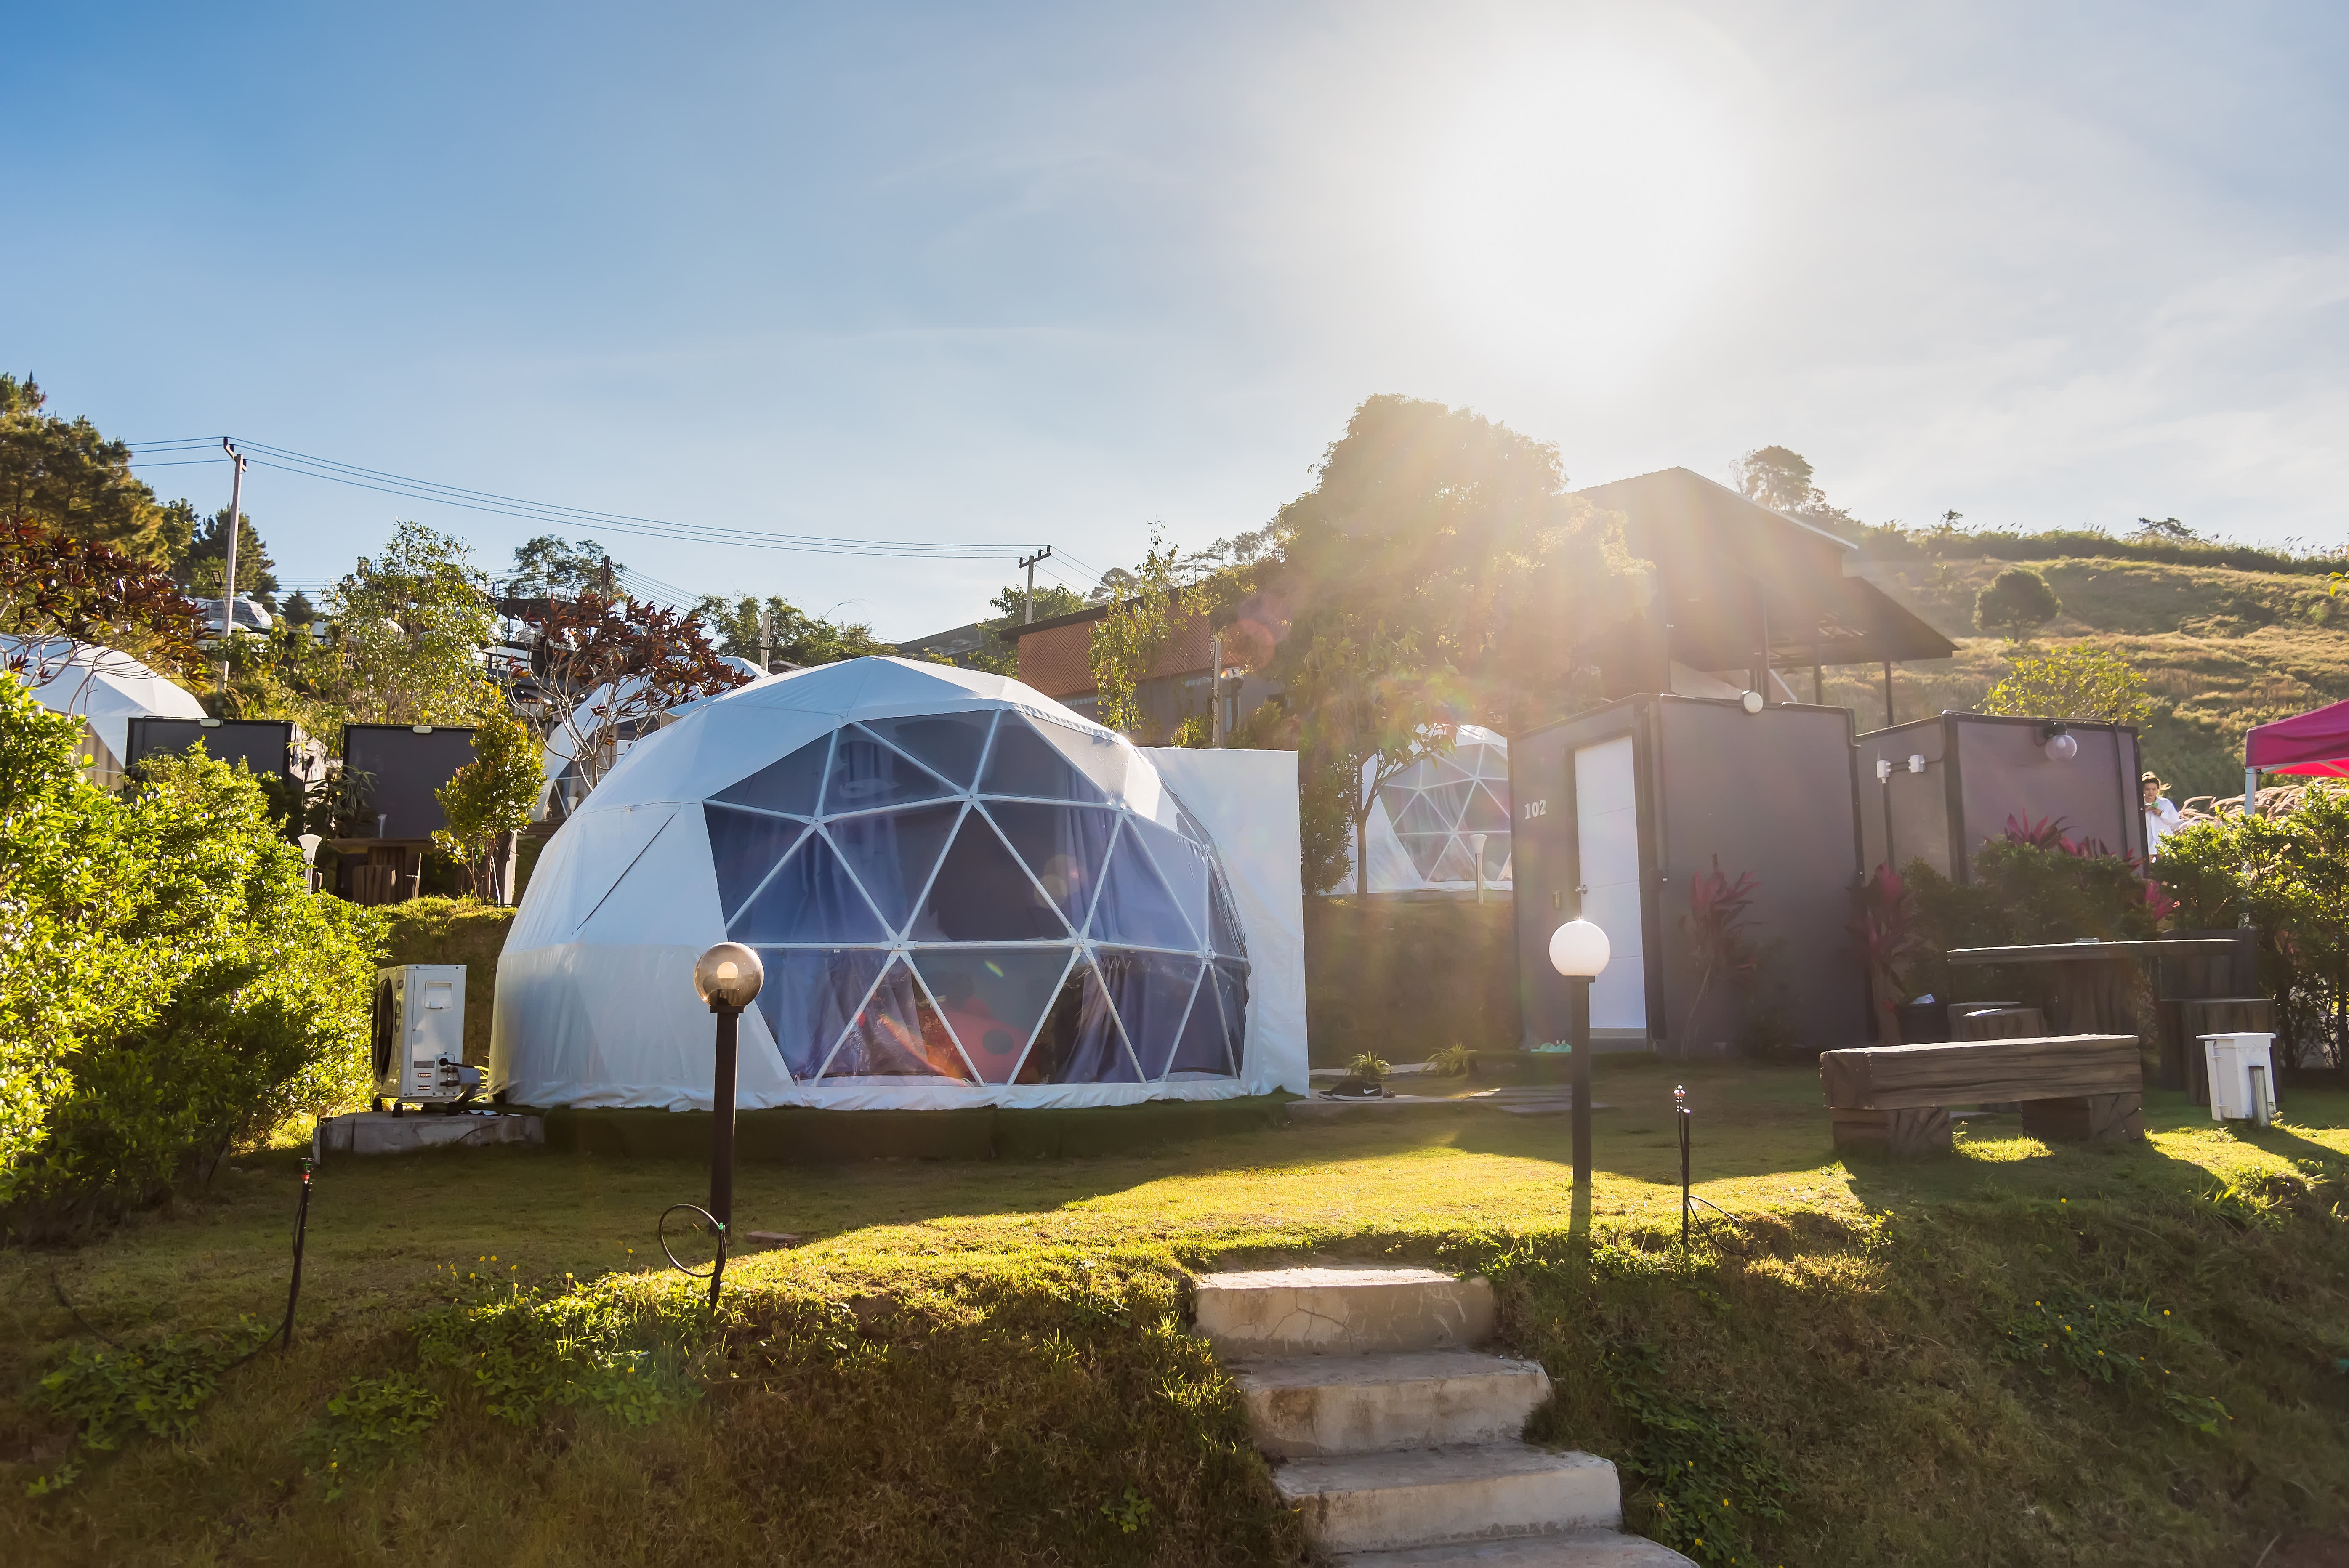 From Geodesic to Monolithic Domes